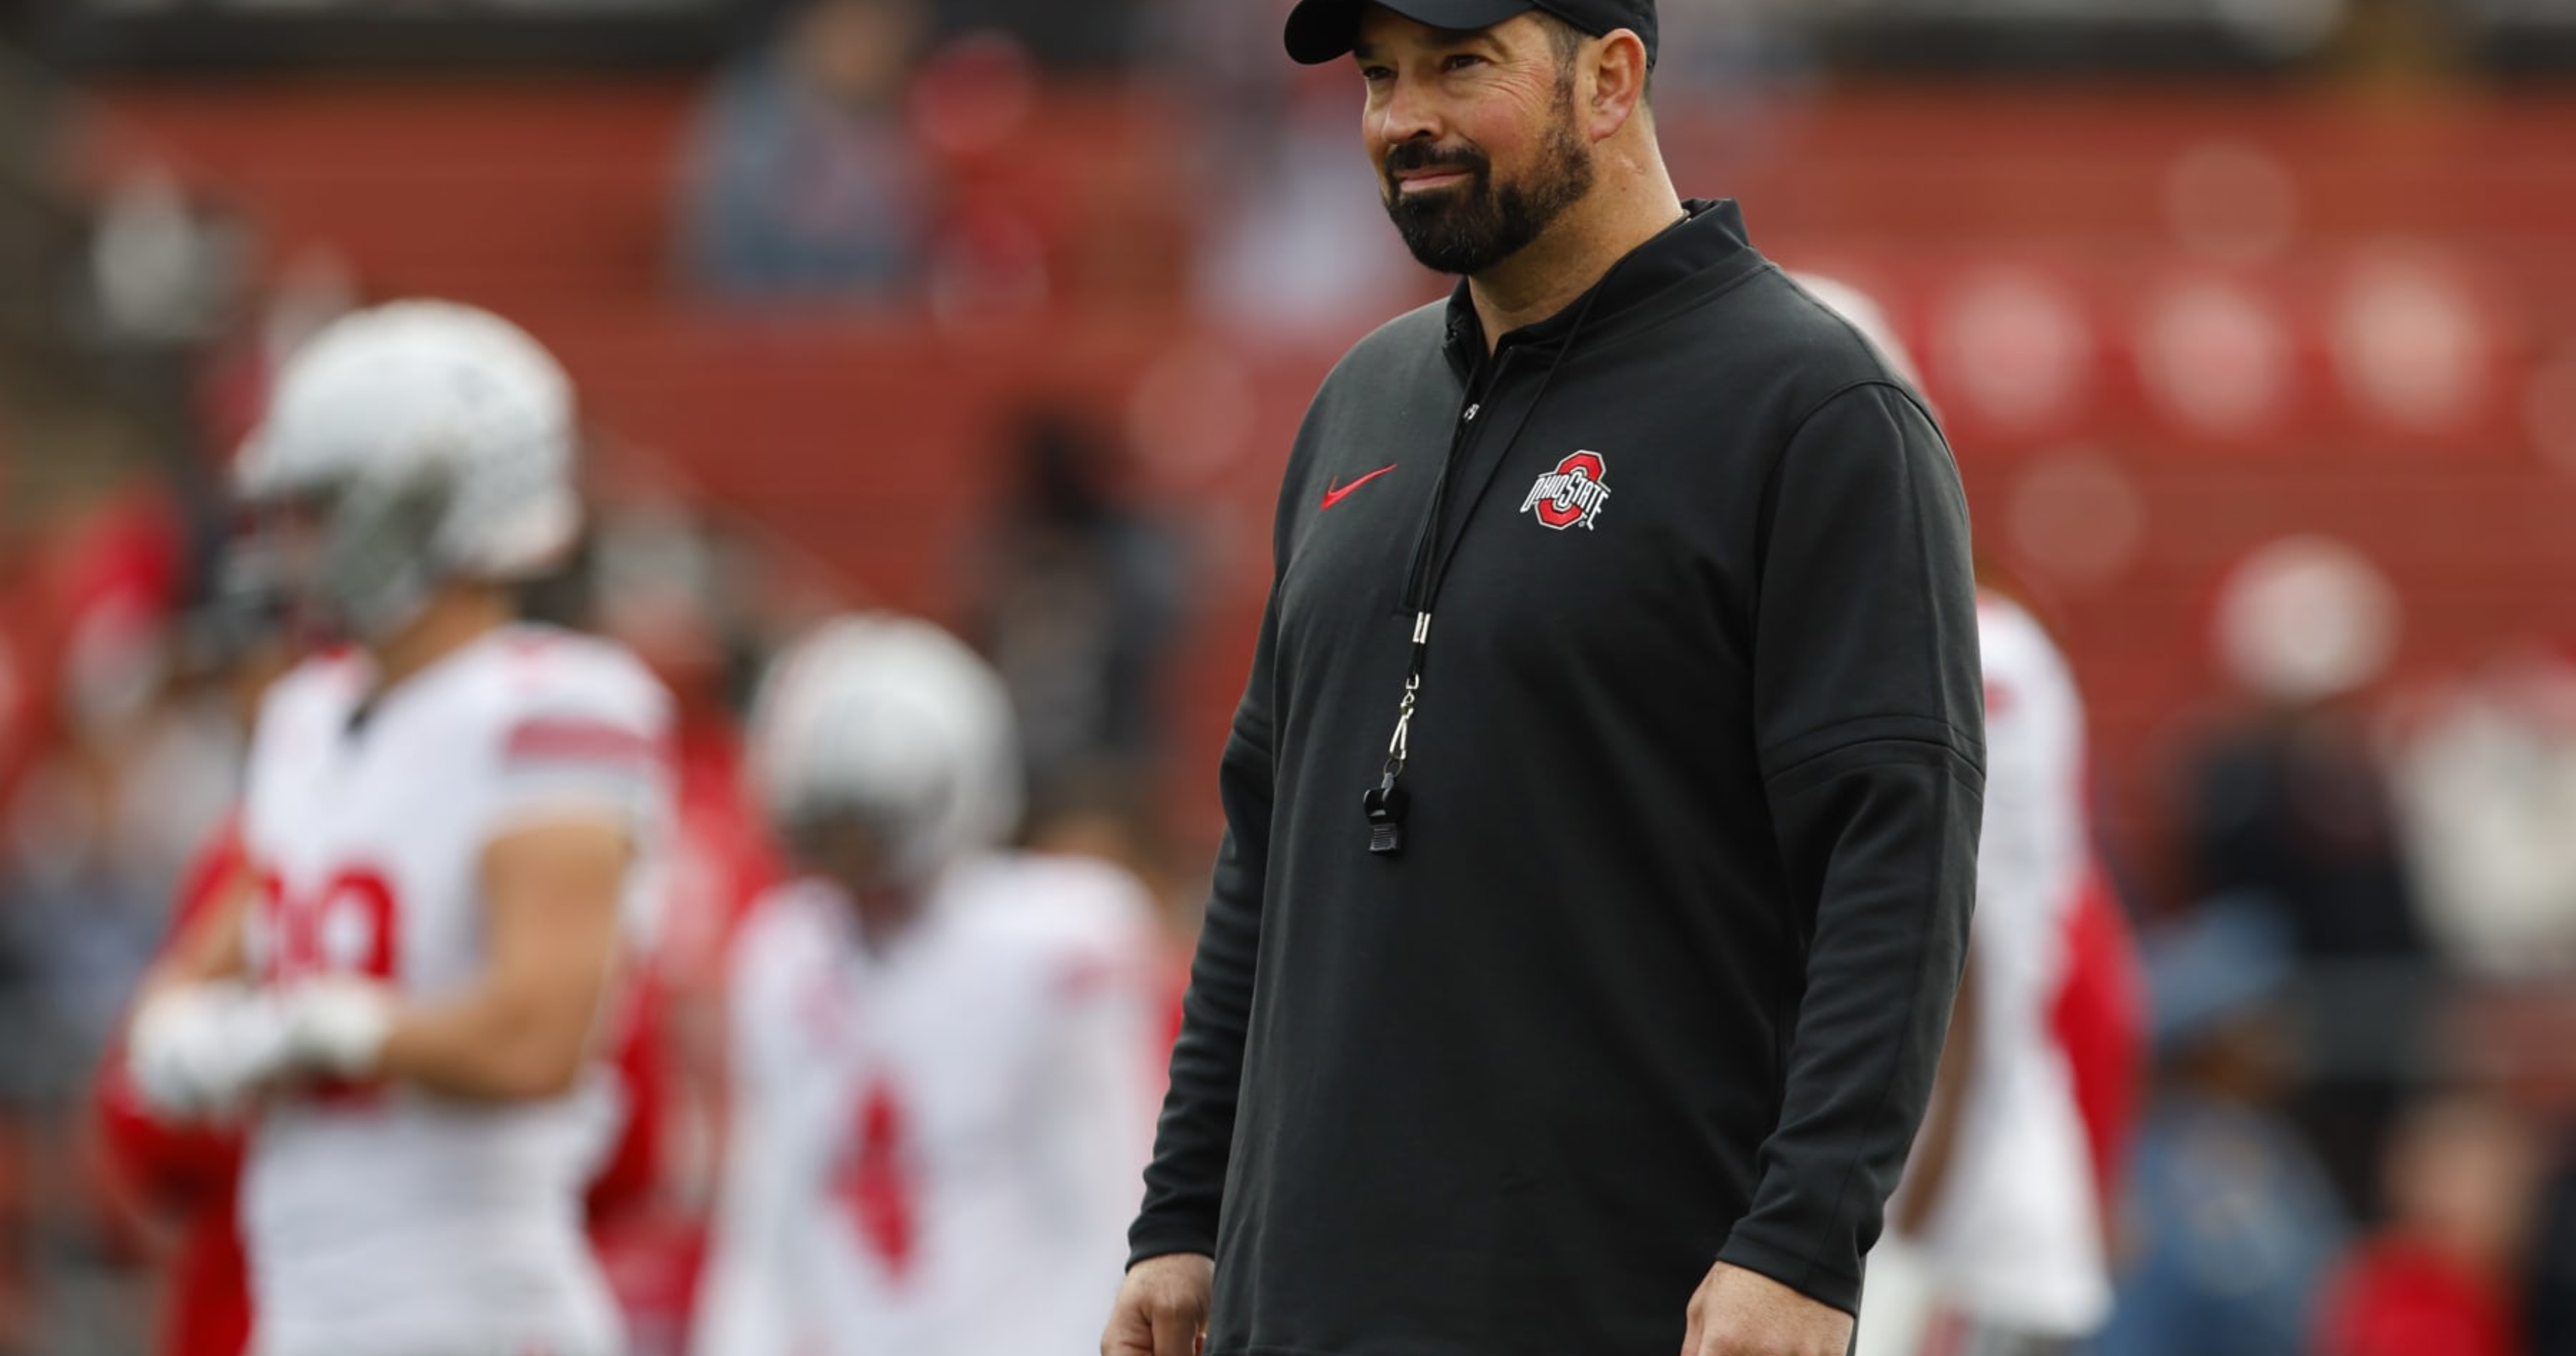 Sources: NCAA says Ohio State's Ryan Day has no known ties to Michigan  sign-stealing probe - Yahoo Sports